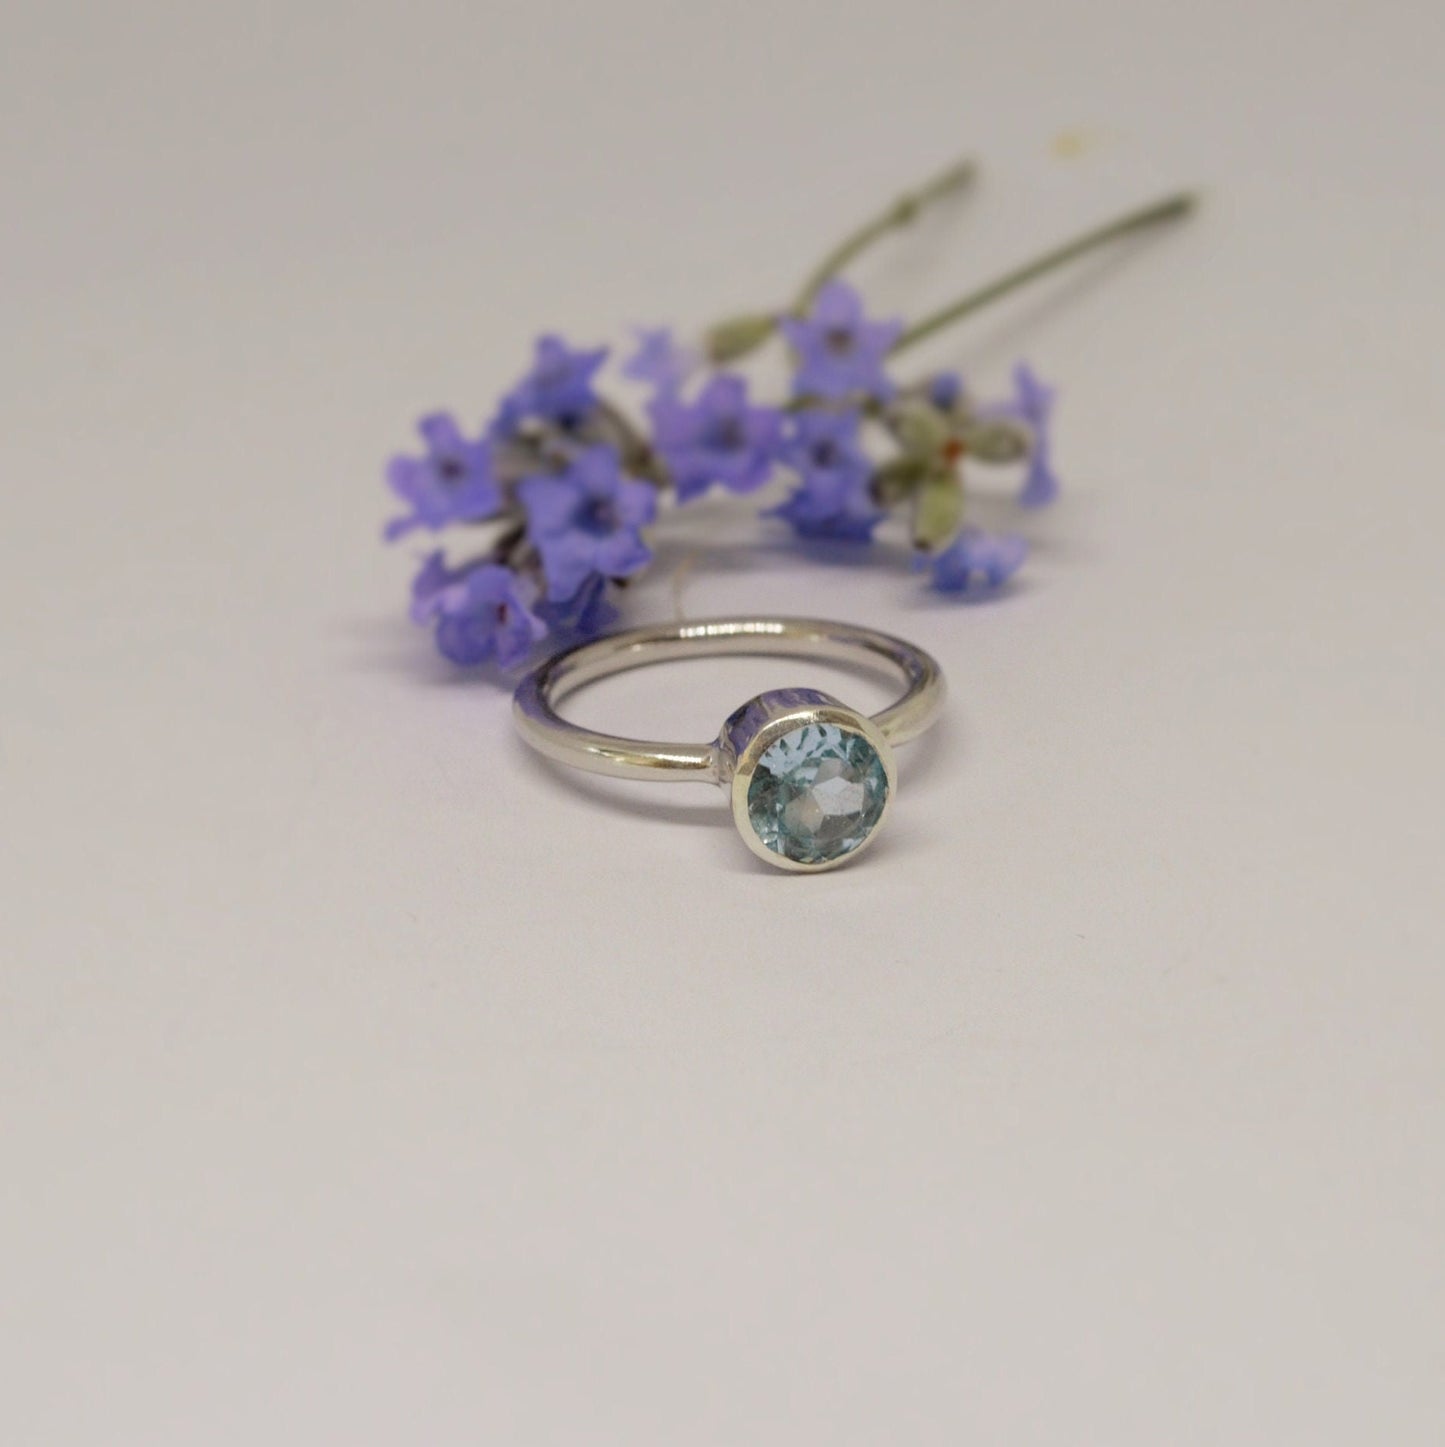 Blue Topaz Ring In 925 Sterling Silver, Unique Dainty Gem Ring, Statement Rings For Women, UK size O, December Birthstone, Gift For Her